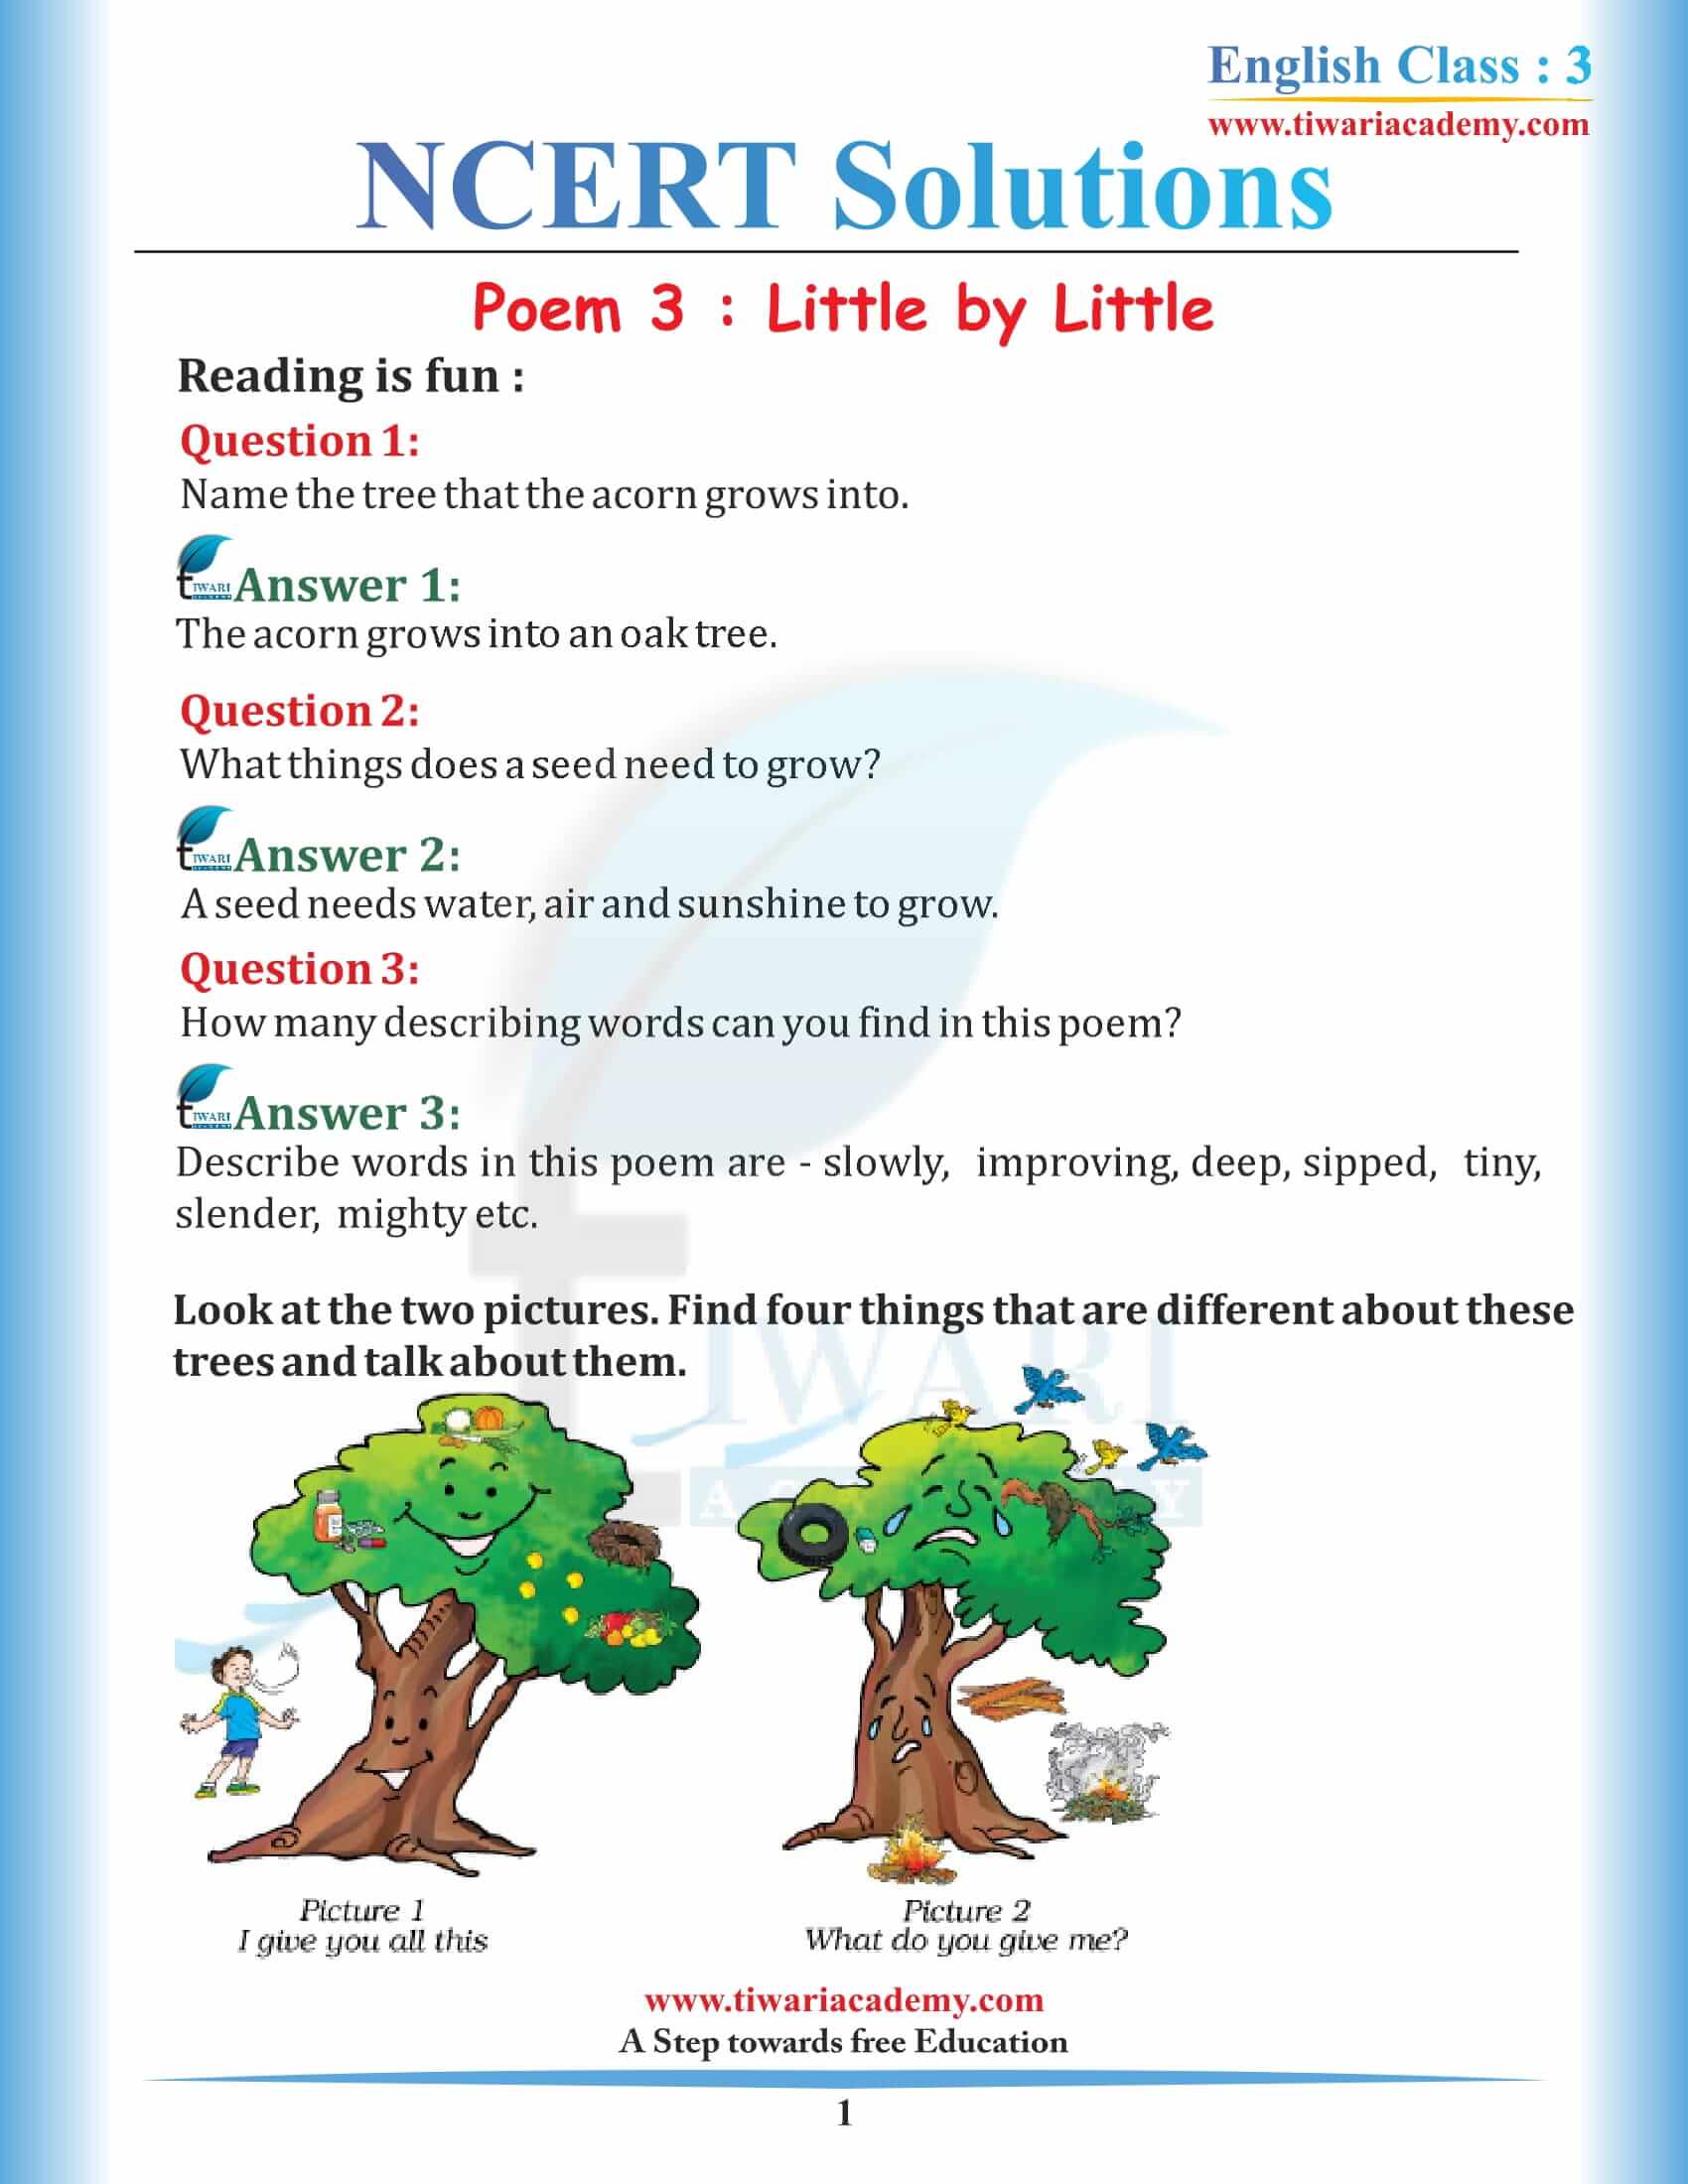 NCERT Solutions for Class 3 English Marigold 3 Unit 3 Chapter 1 Little by Little